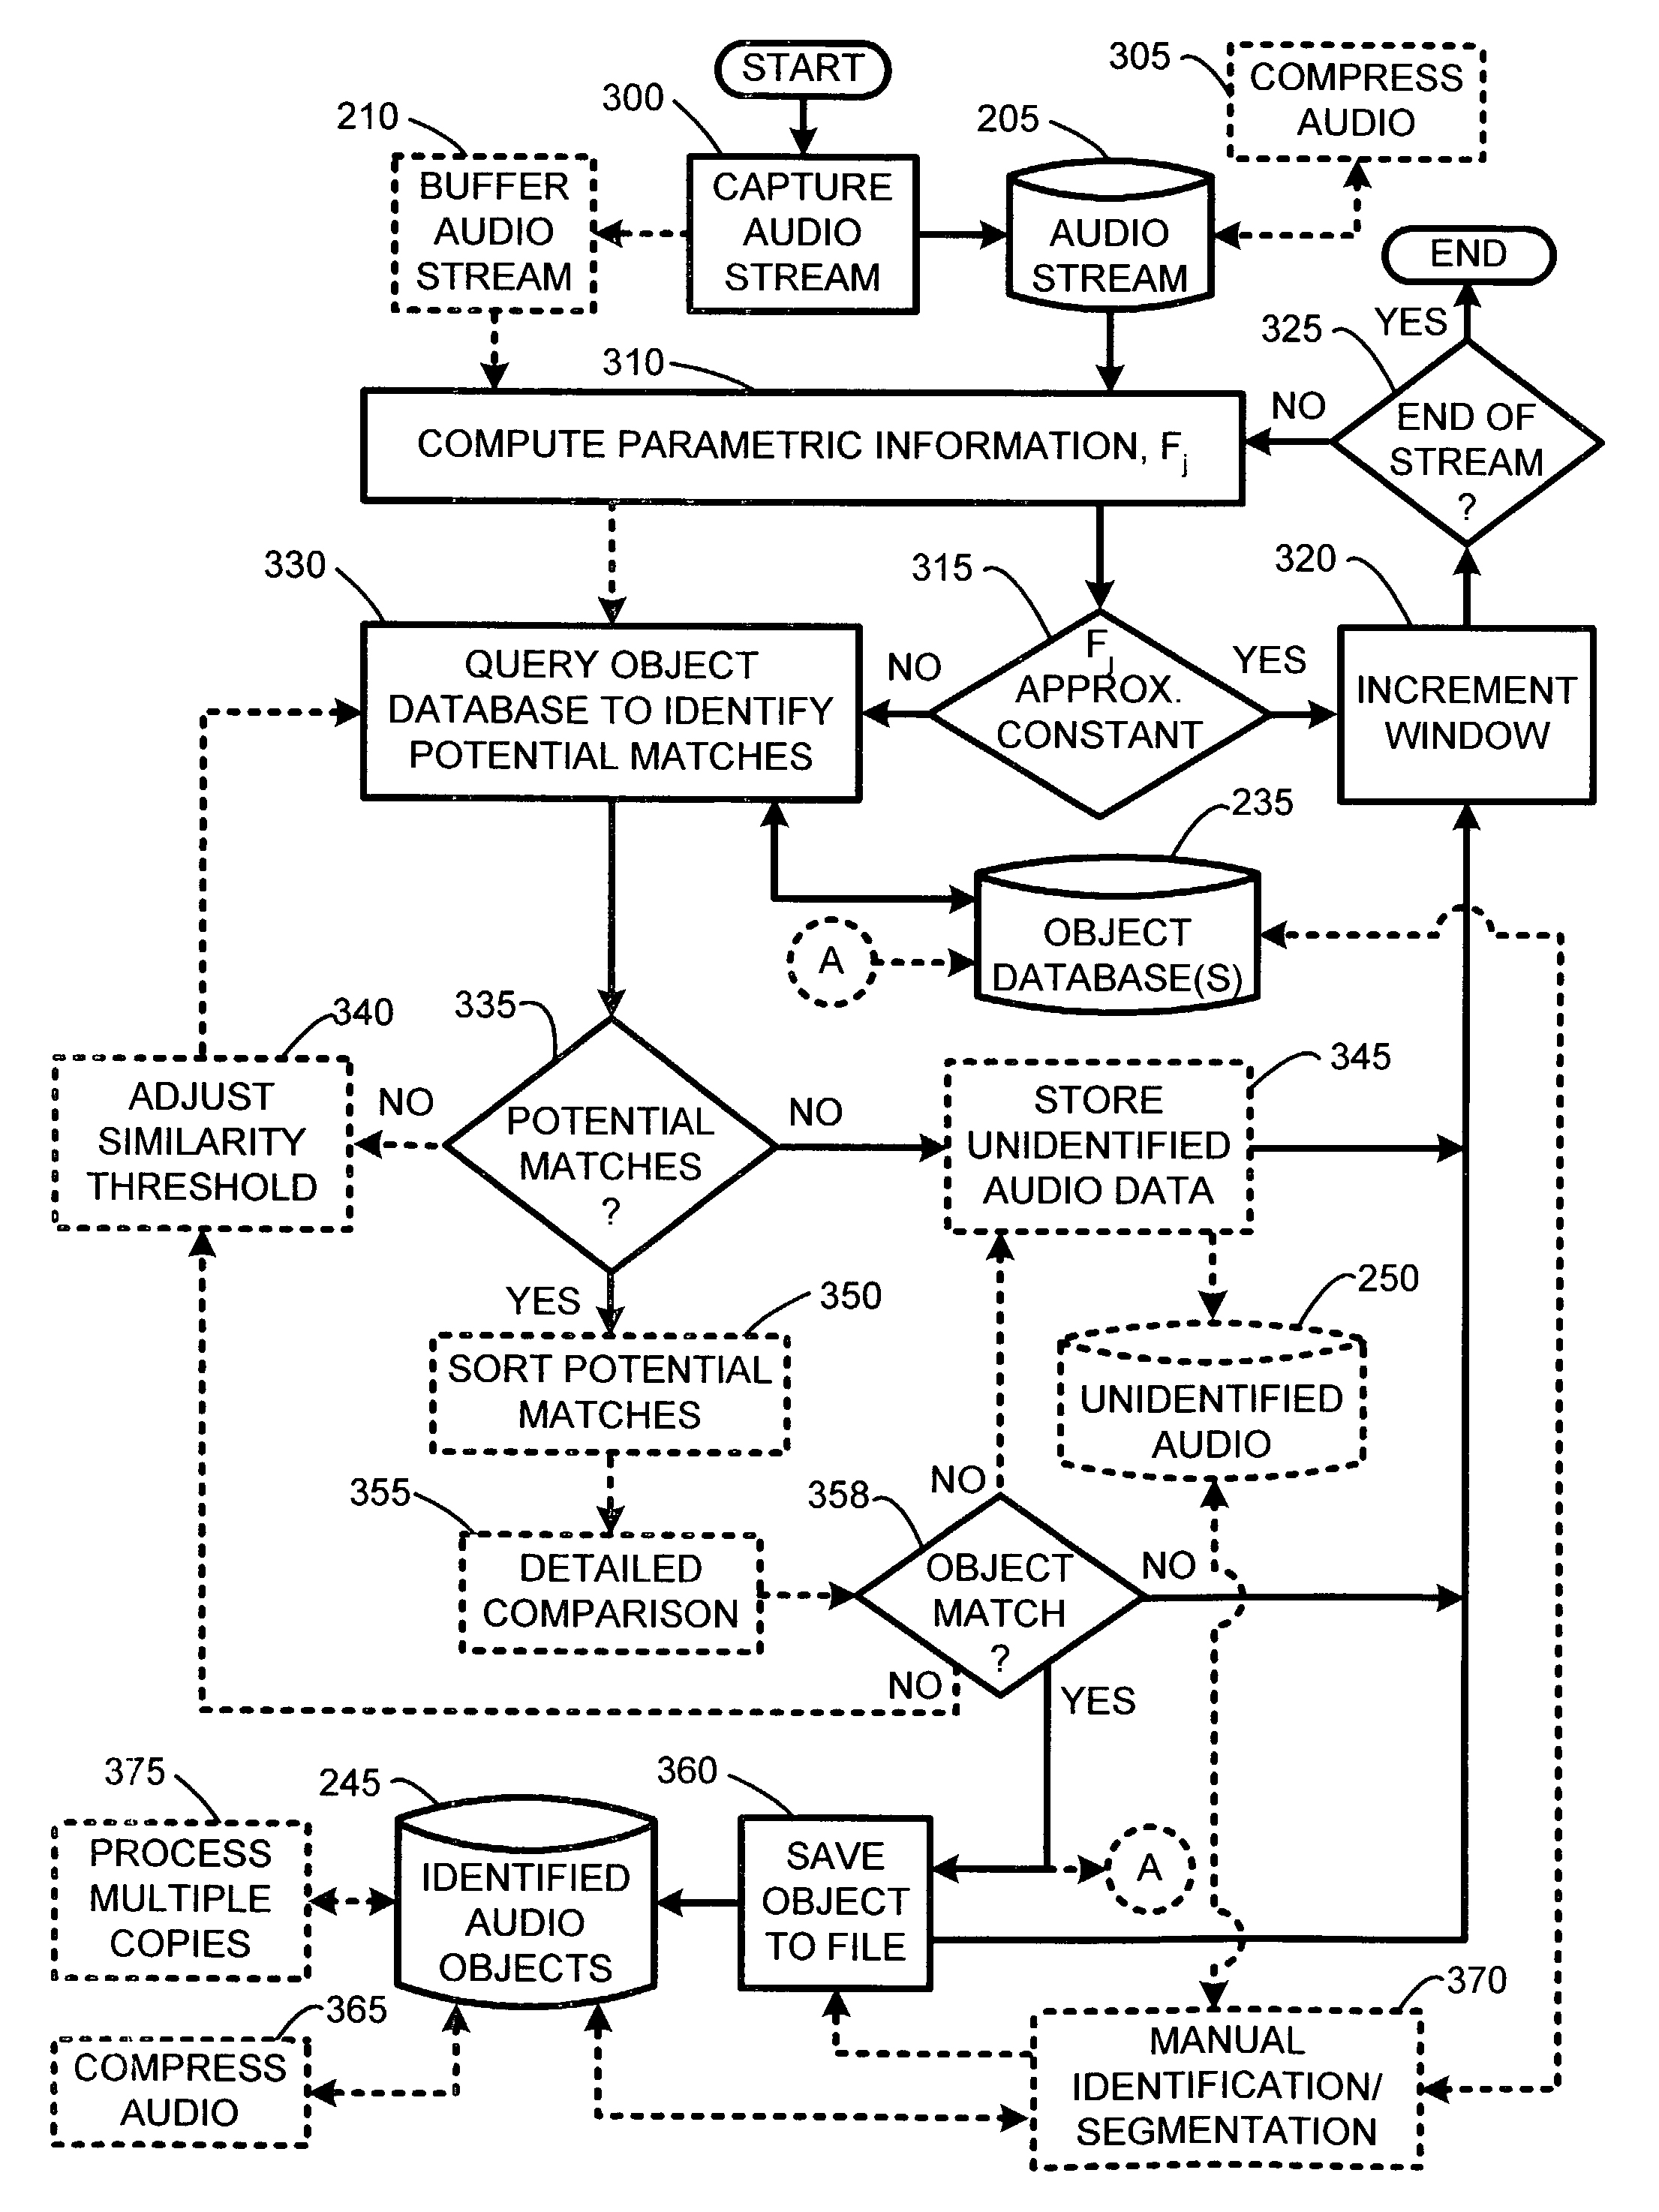 System and method for automatic segmentation and identification of repeating objects from an audio stream